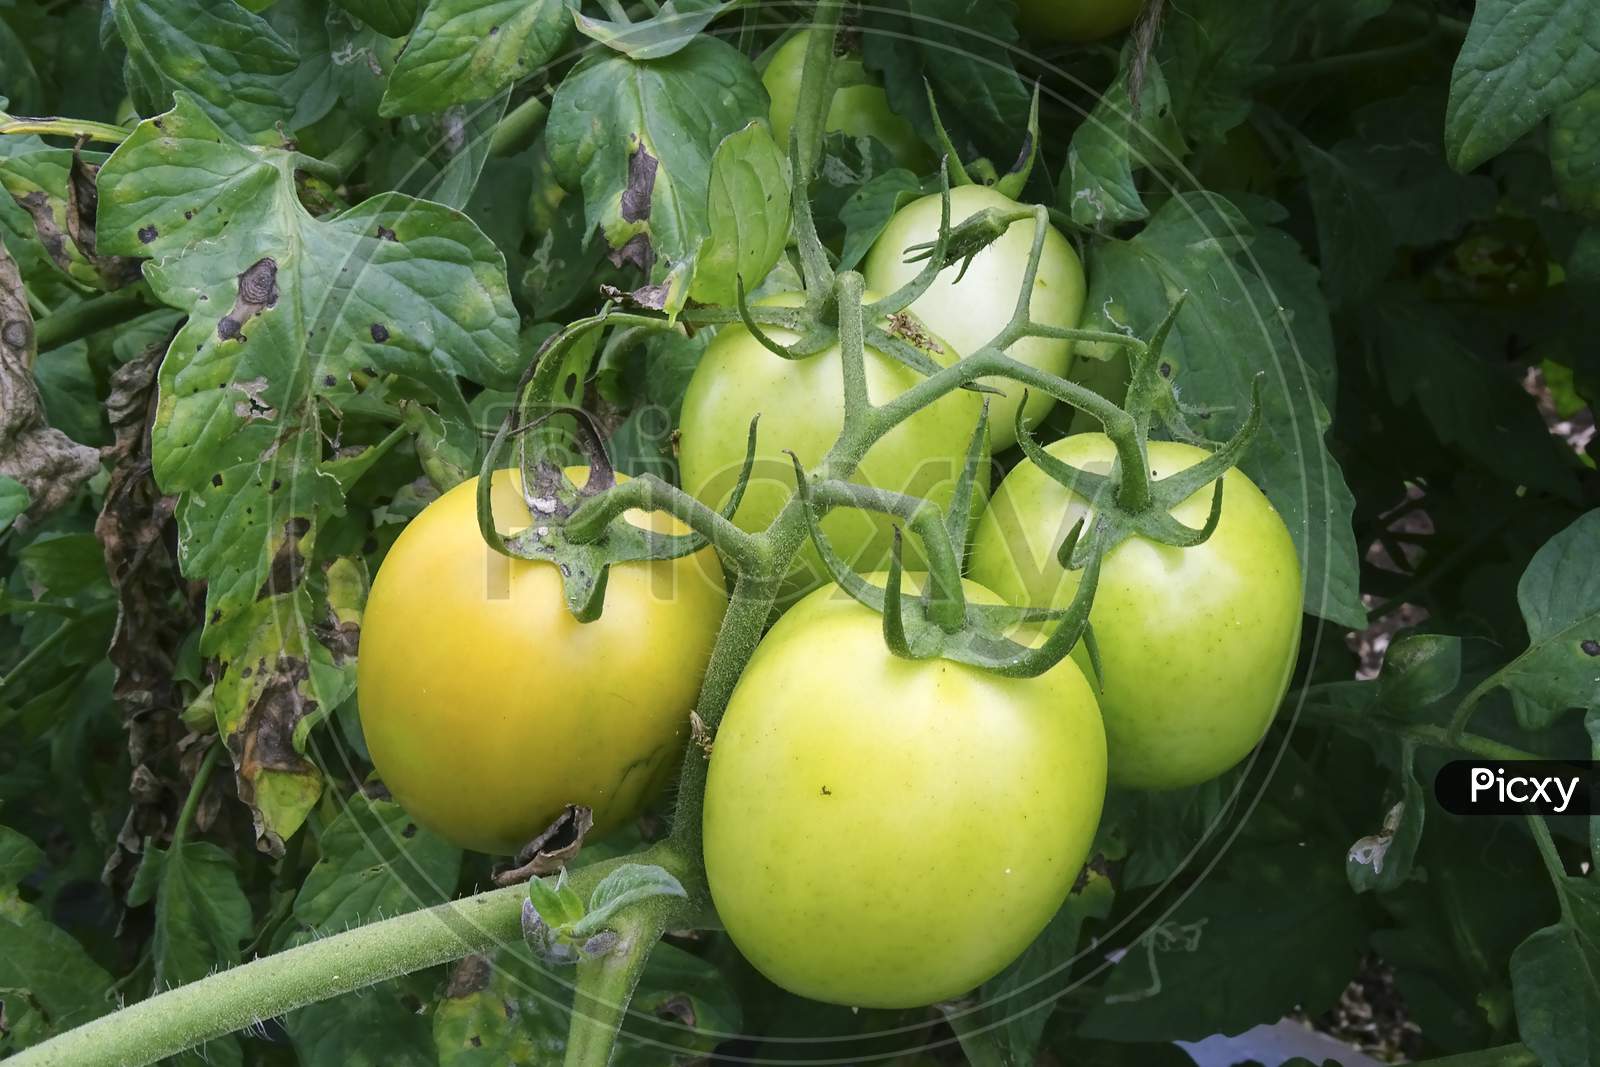 Organic ripe tomatoes on the vine ready to be picked